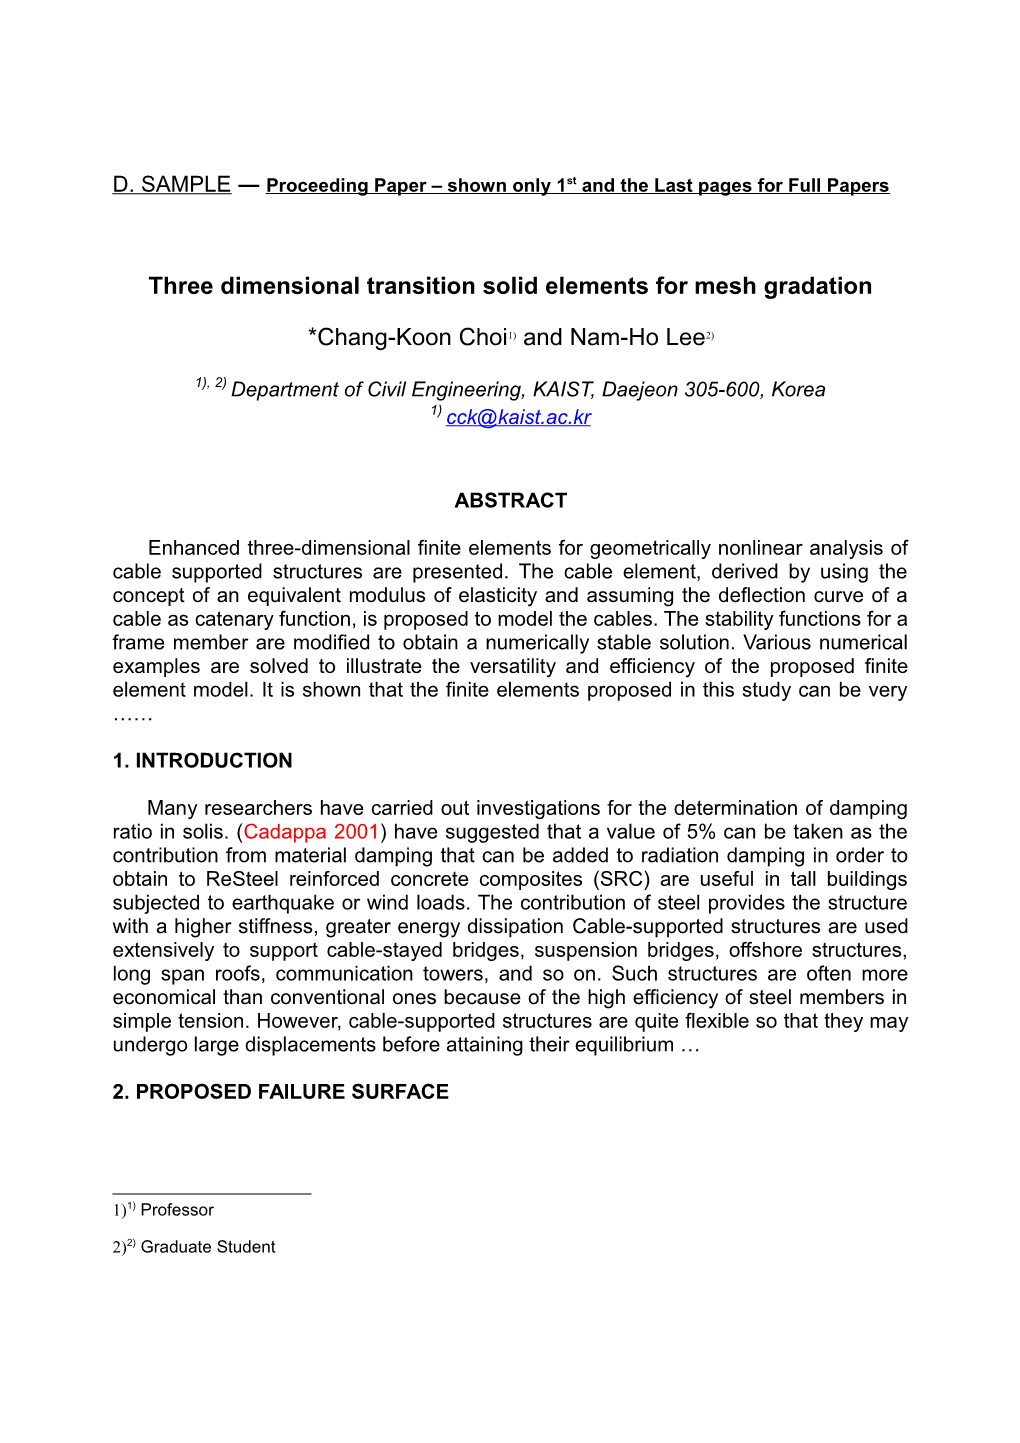 Three Dimensional Transition Solid Elements for Mesh Gradation